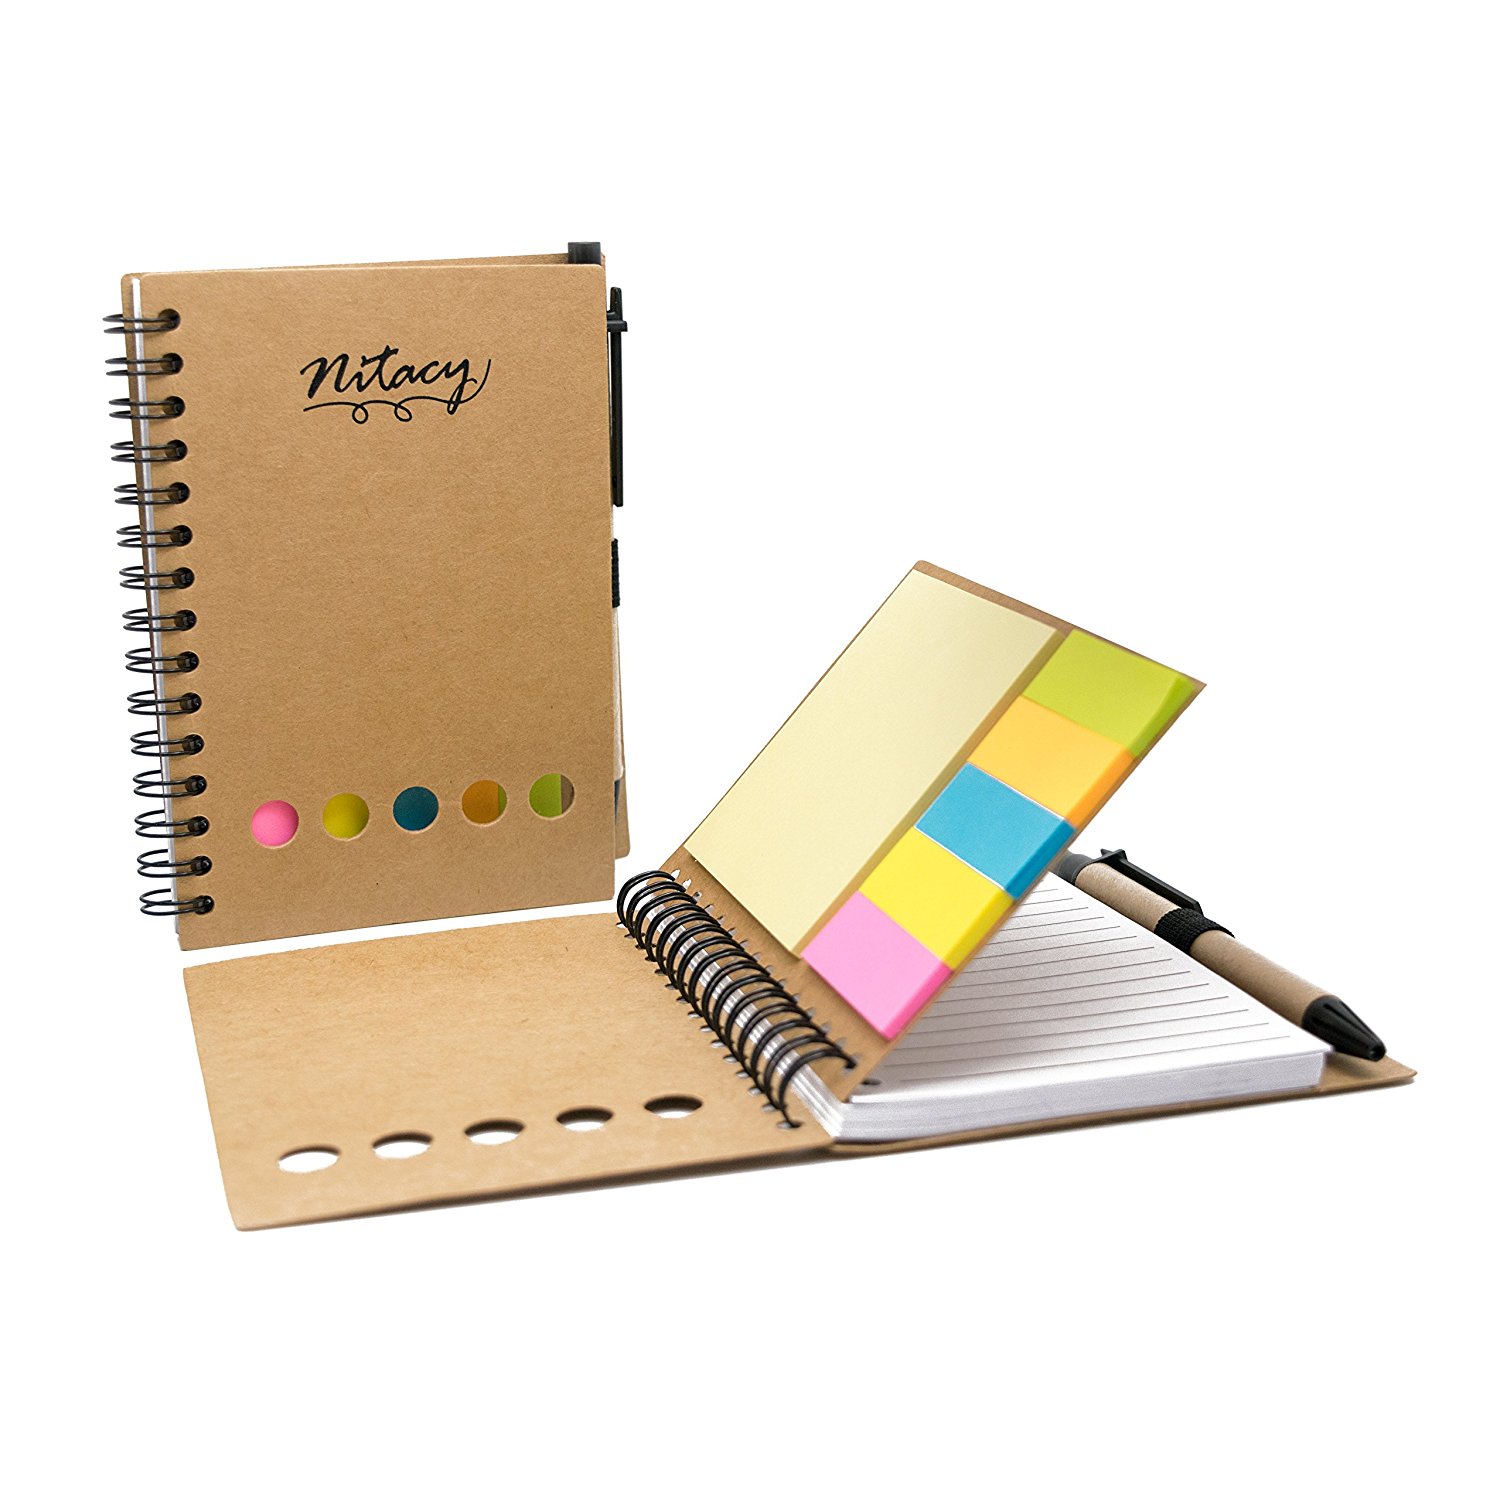 Mini Recycled Notebook and Pen | Recycled Notebook with Matching Pen